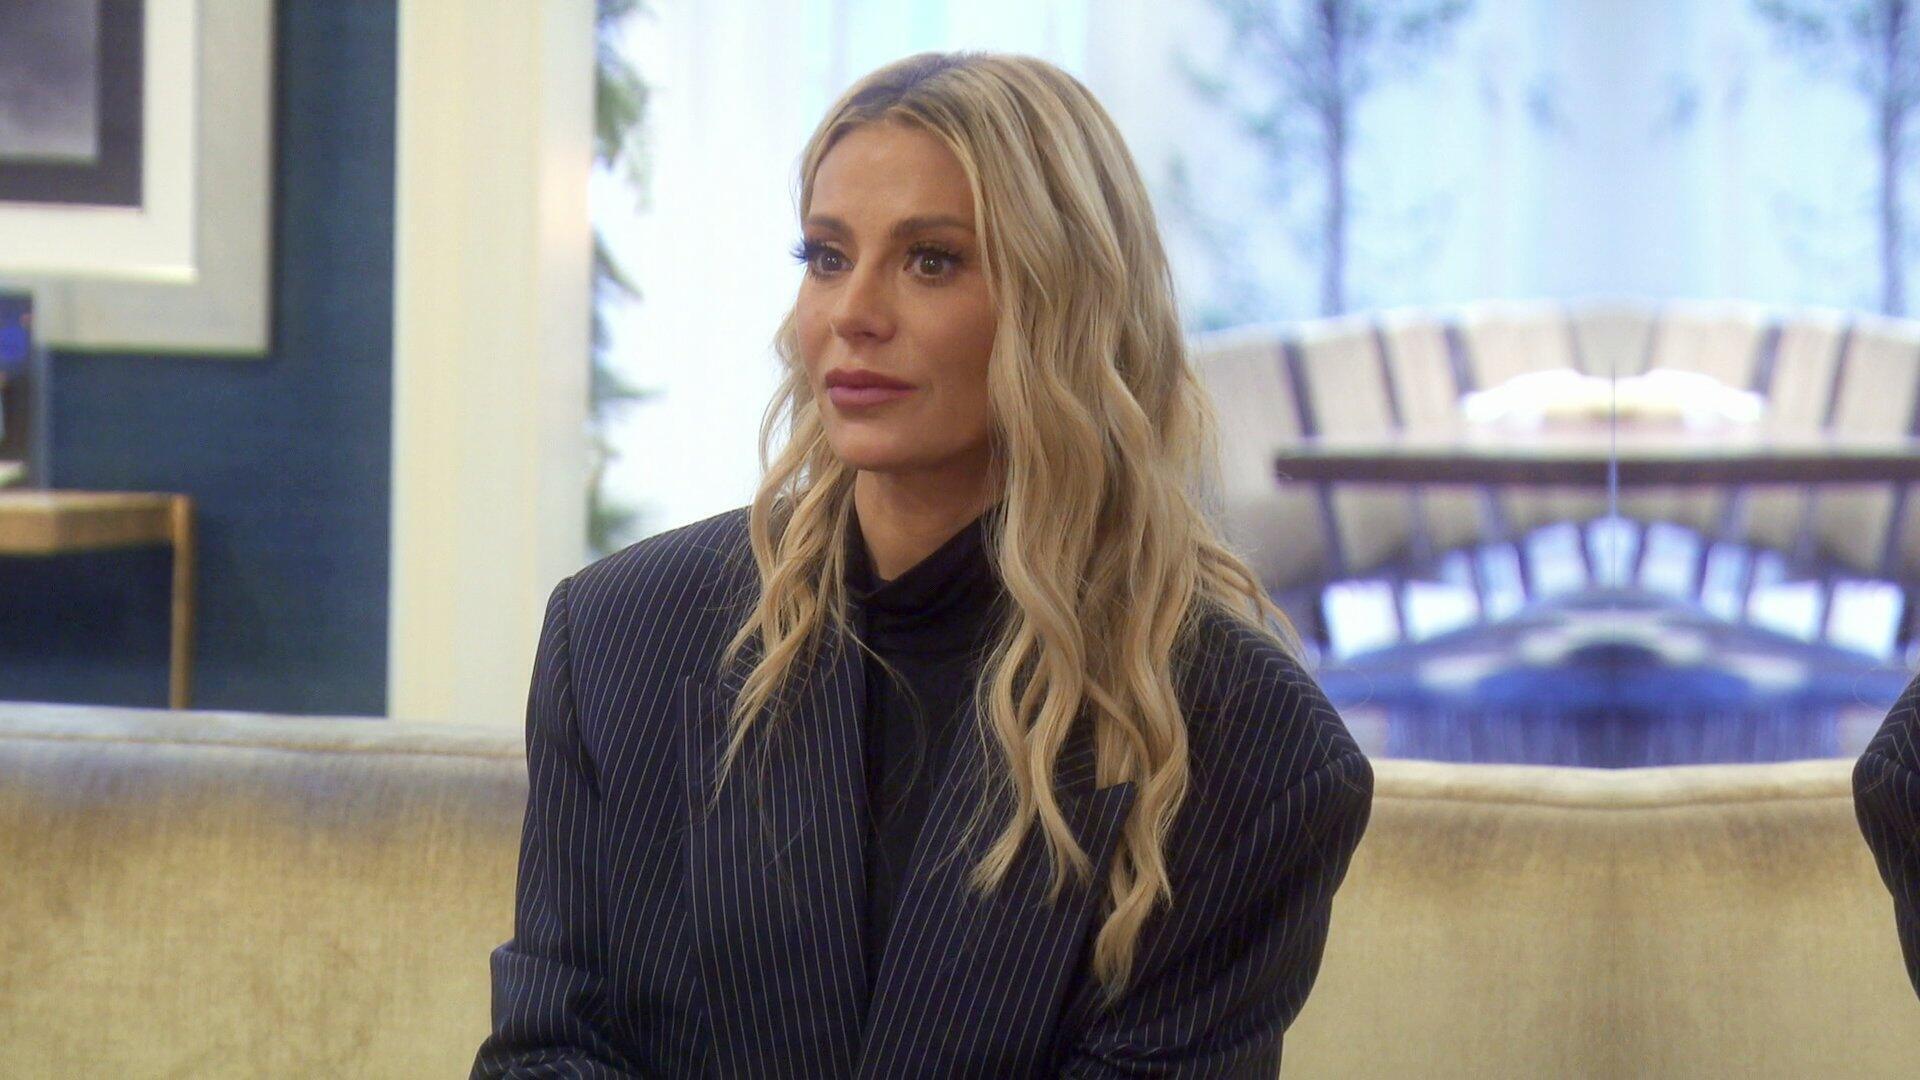 Dorit Kemsley - The Real Housewives of Beverly Hills | Season 12 Episode 11 | Crystal Kung Minkoff style